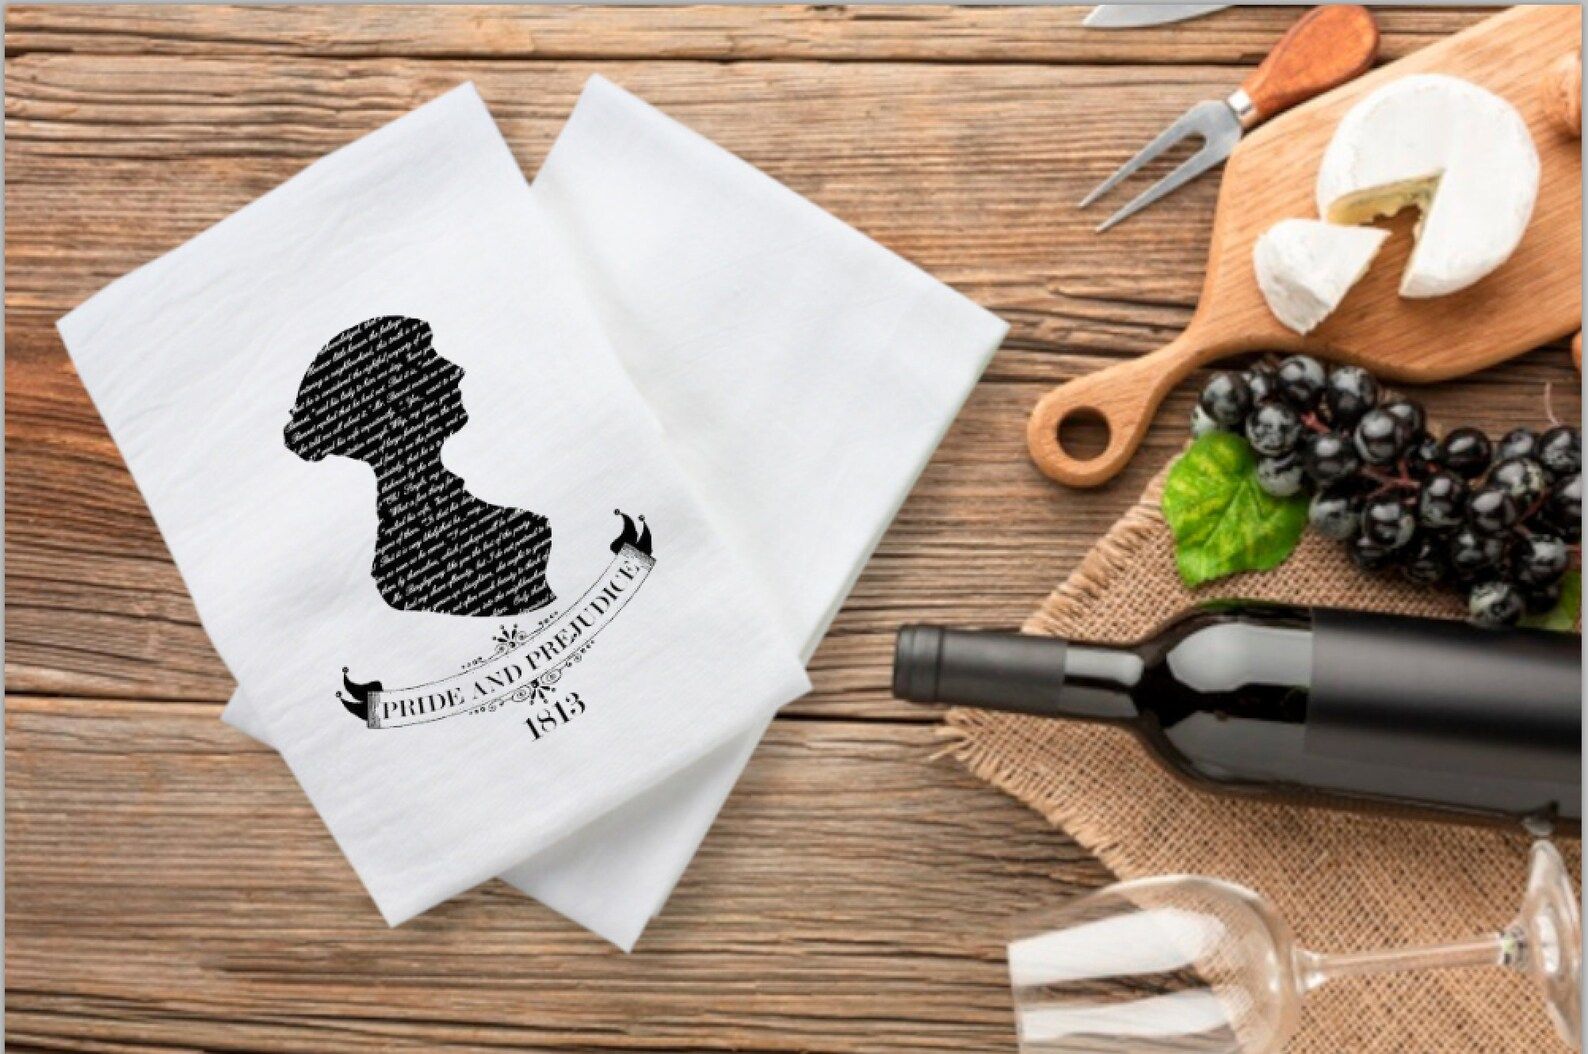 An overhead photo of two white tea towels with a silhouette of a woman in black and the title, "Pride and Prejudice" with the date 1813 below it. To the right of the tea towels is a bottle of wine, glasses, grapes, and a cheese board.